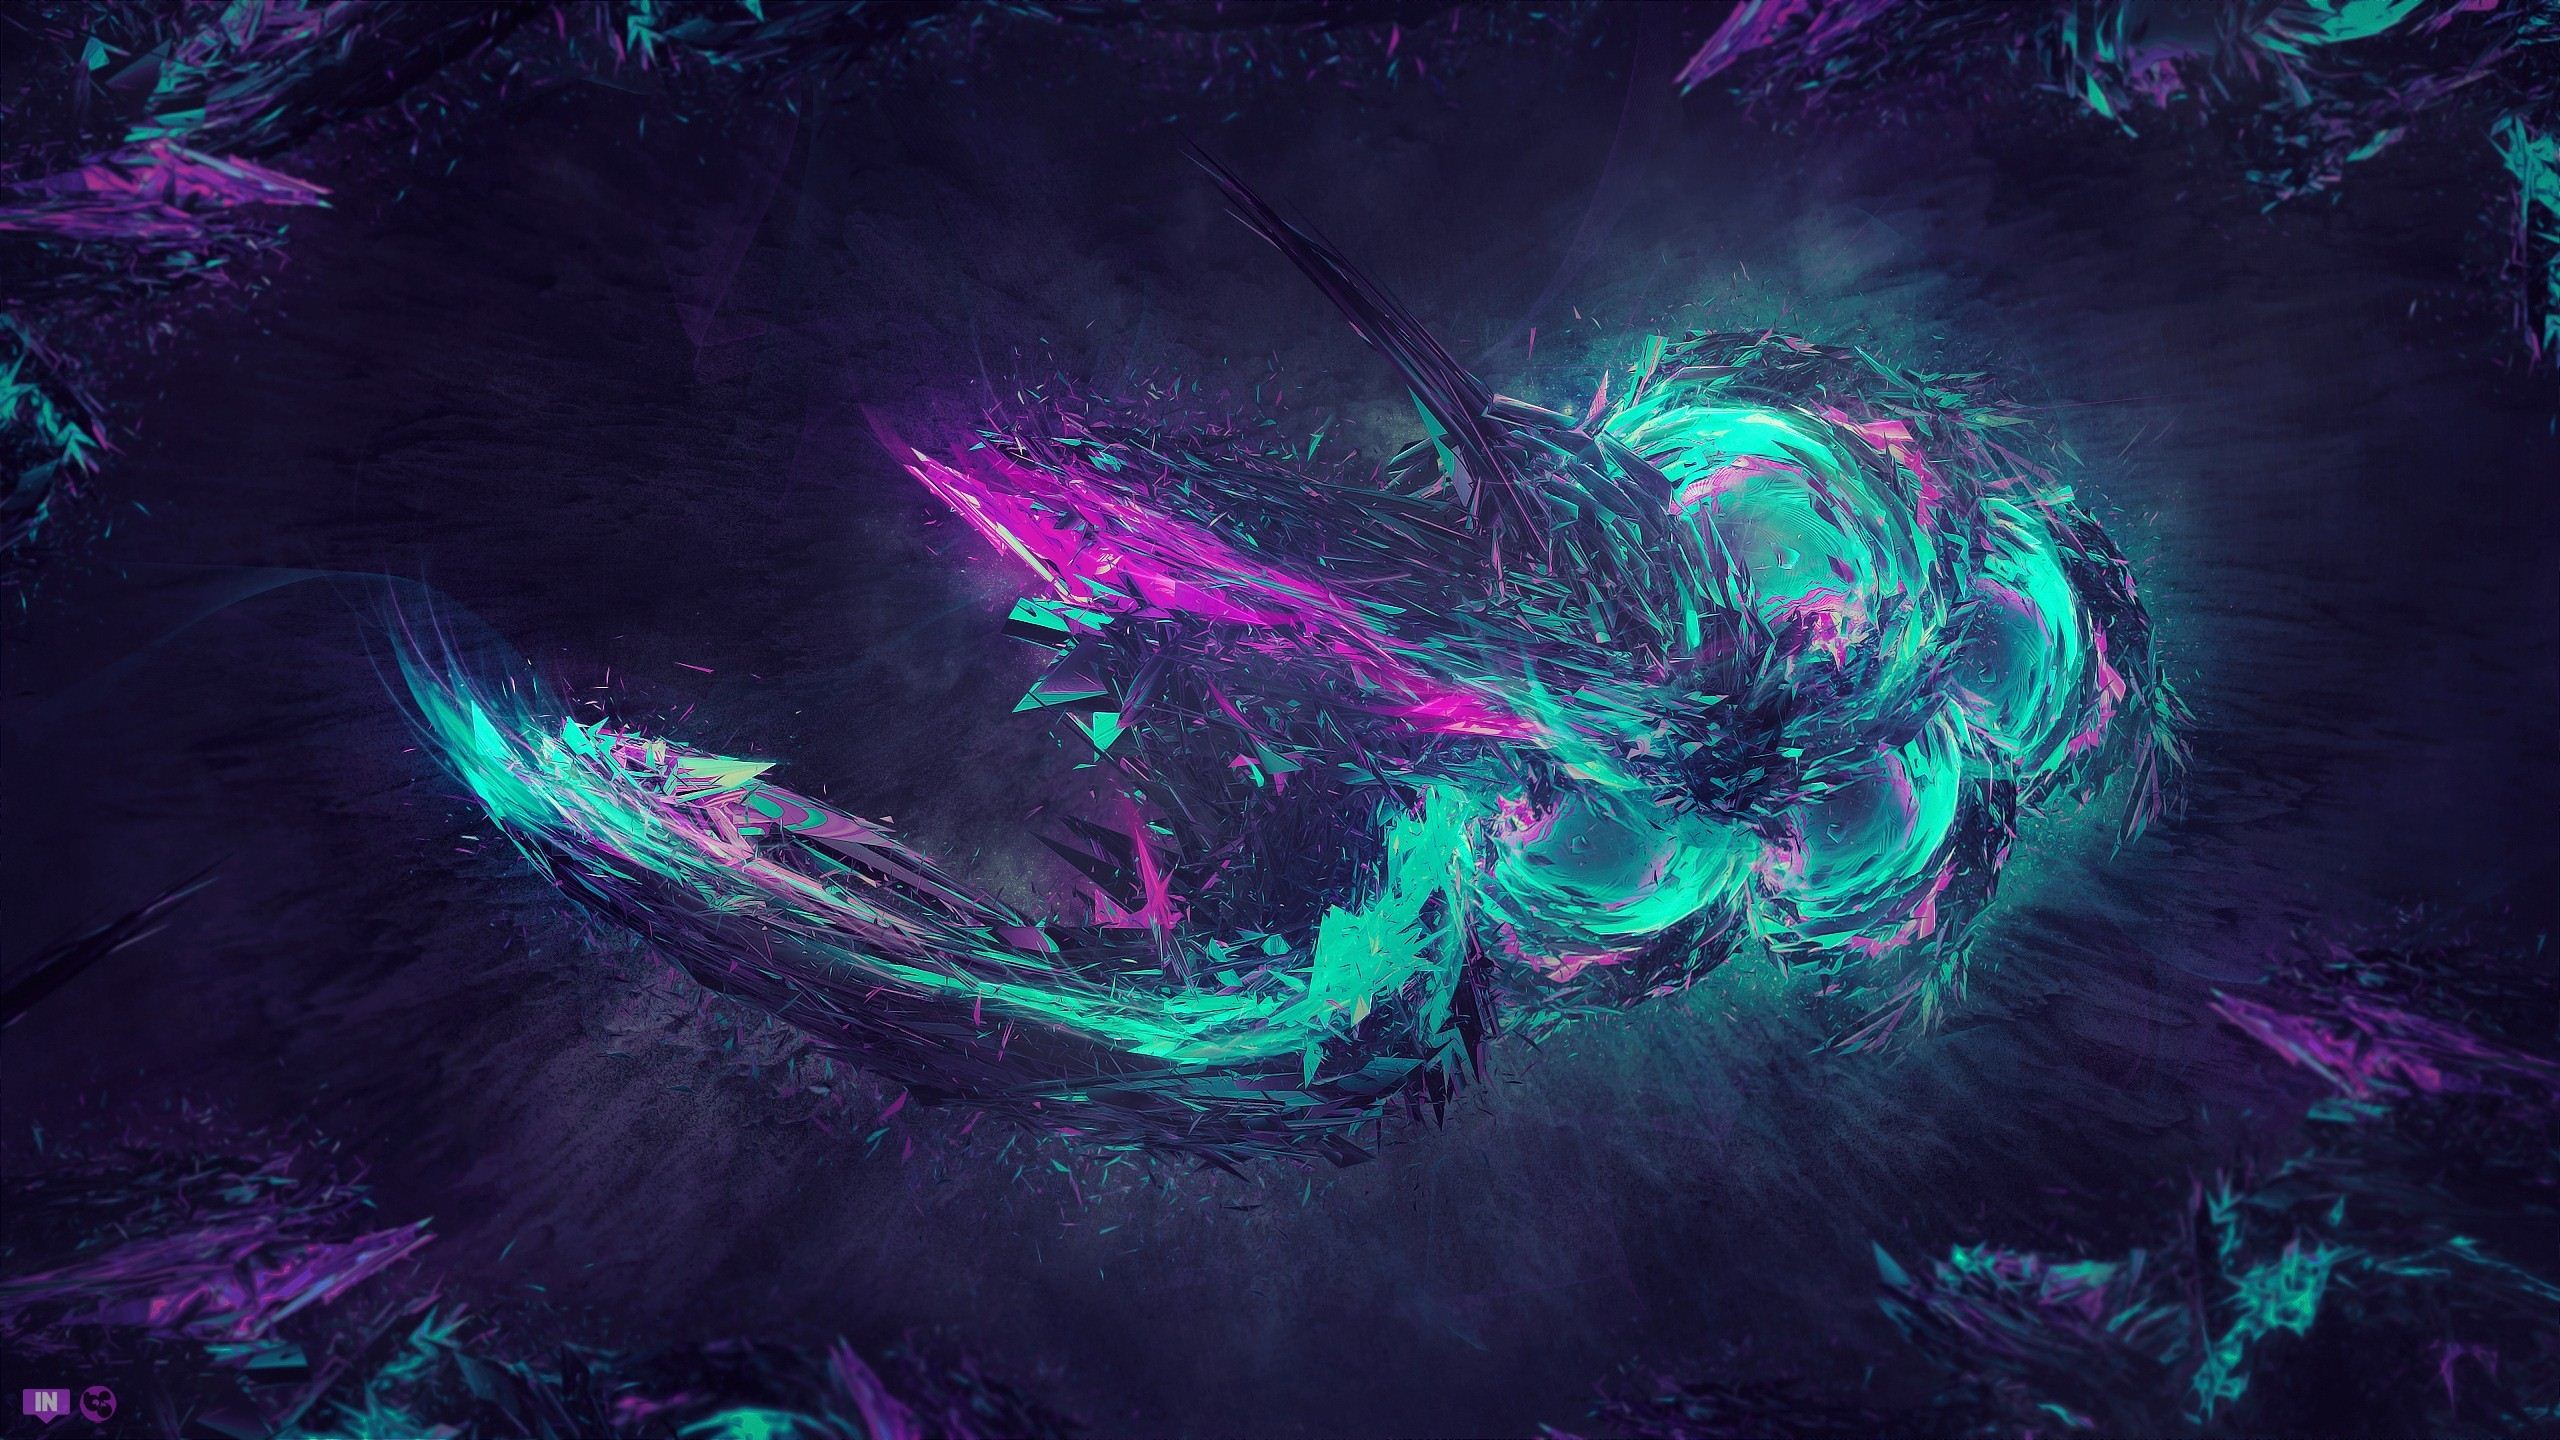 2560x1440 Purple and Teal Effects - Desktop Backgrounds